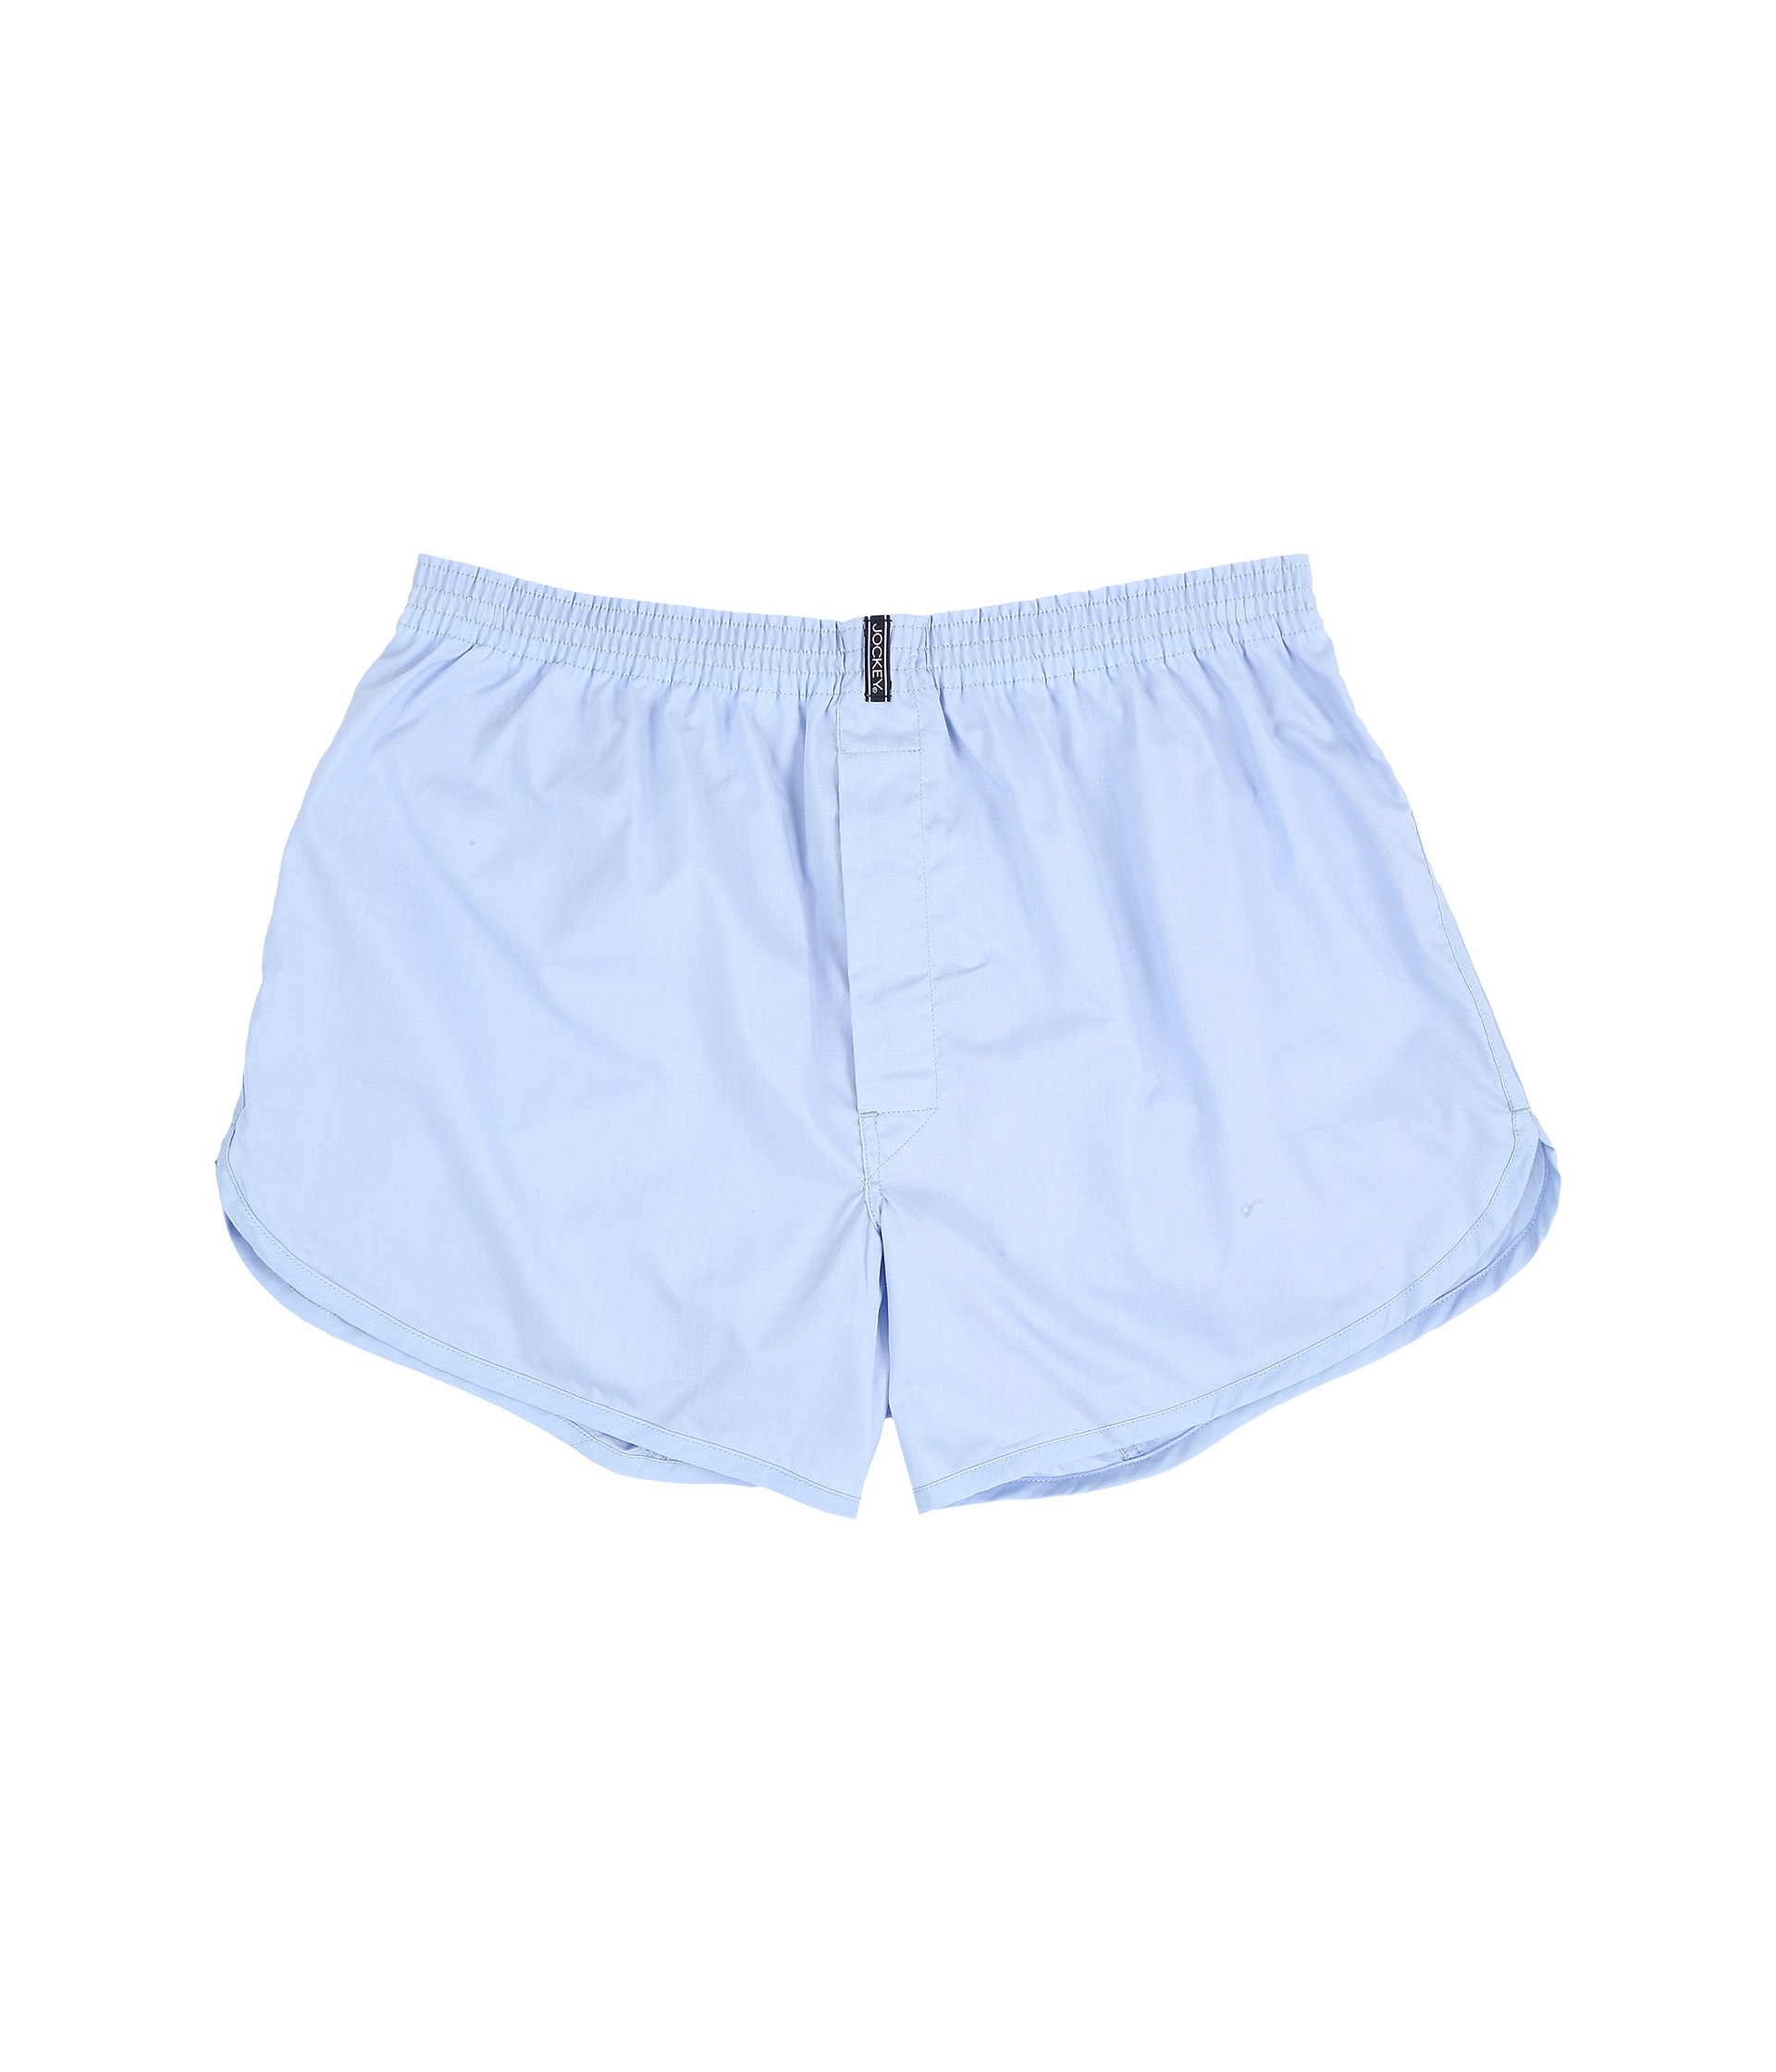 Jockey Blended Tapered Boxer - 4 Pack at Zappos.com